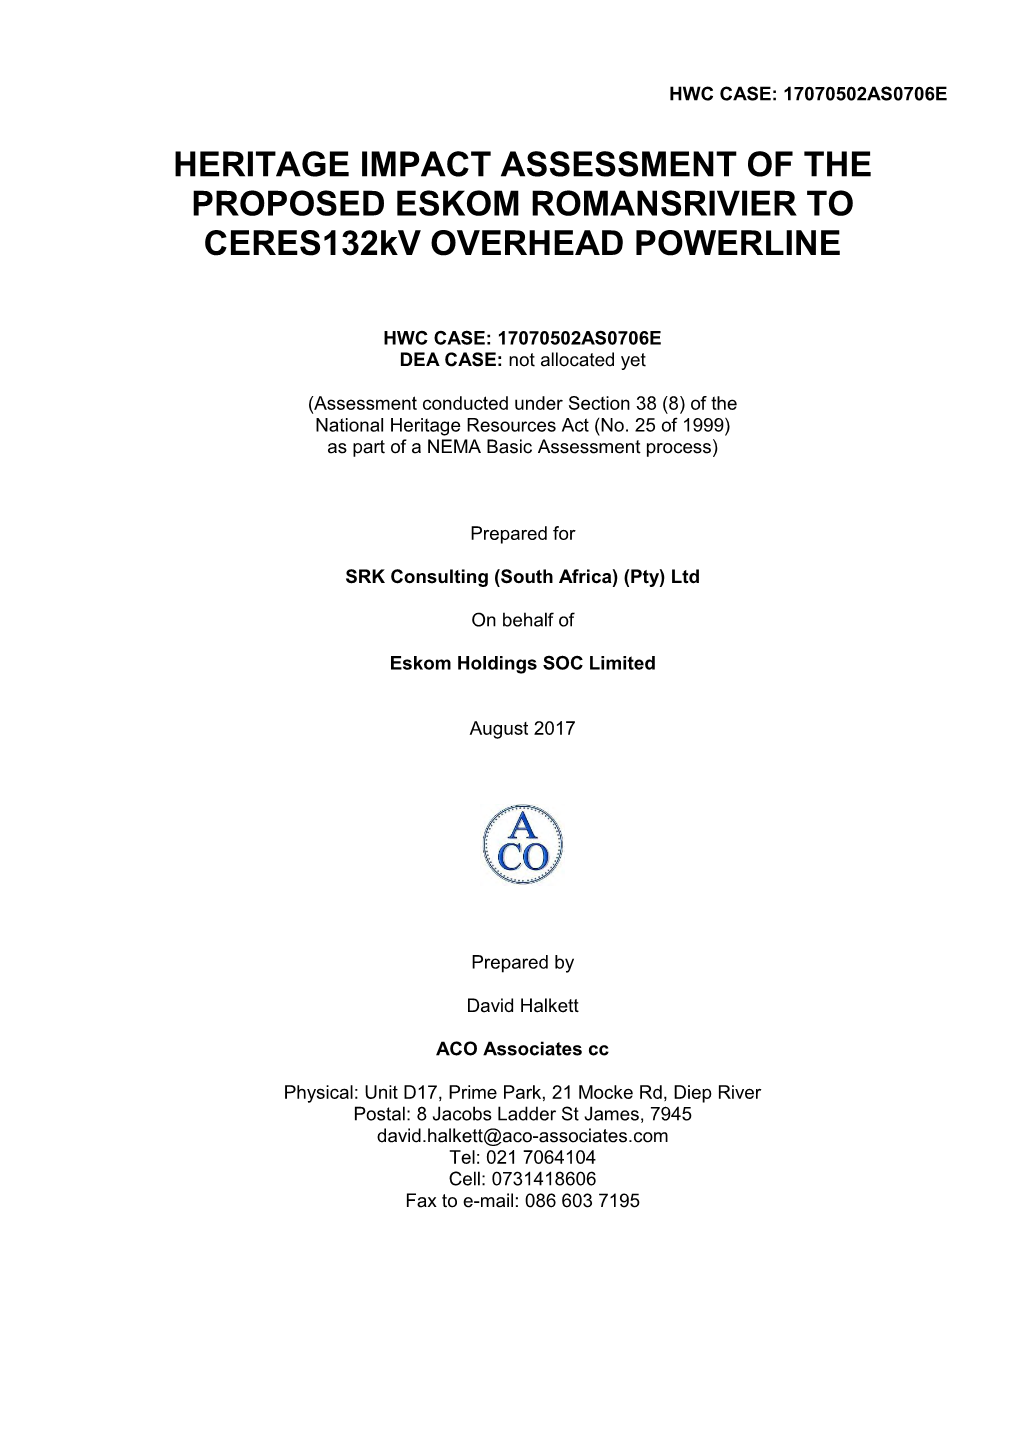 HERITAGE IMPACT ASSESSMENT of the PROPOSED ESKOM ROMANSRIVIER to Ceres132kv OVERHEAD POWERLINE